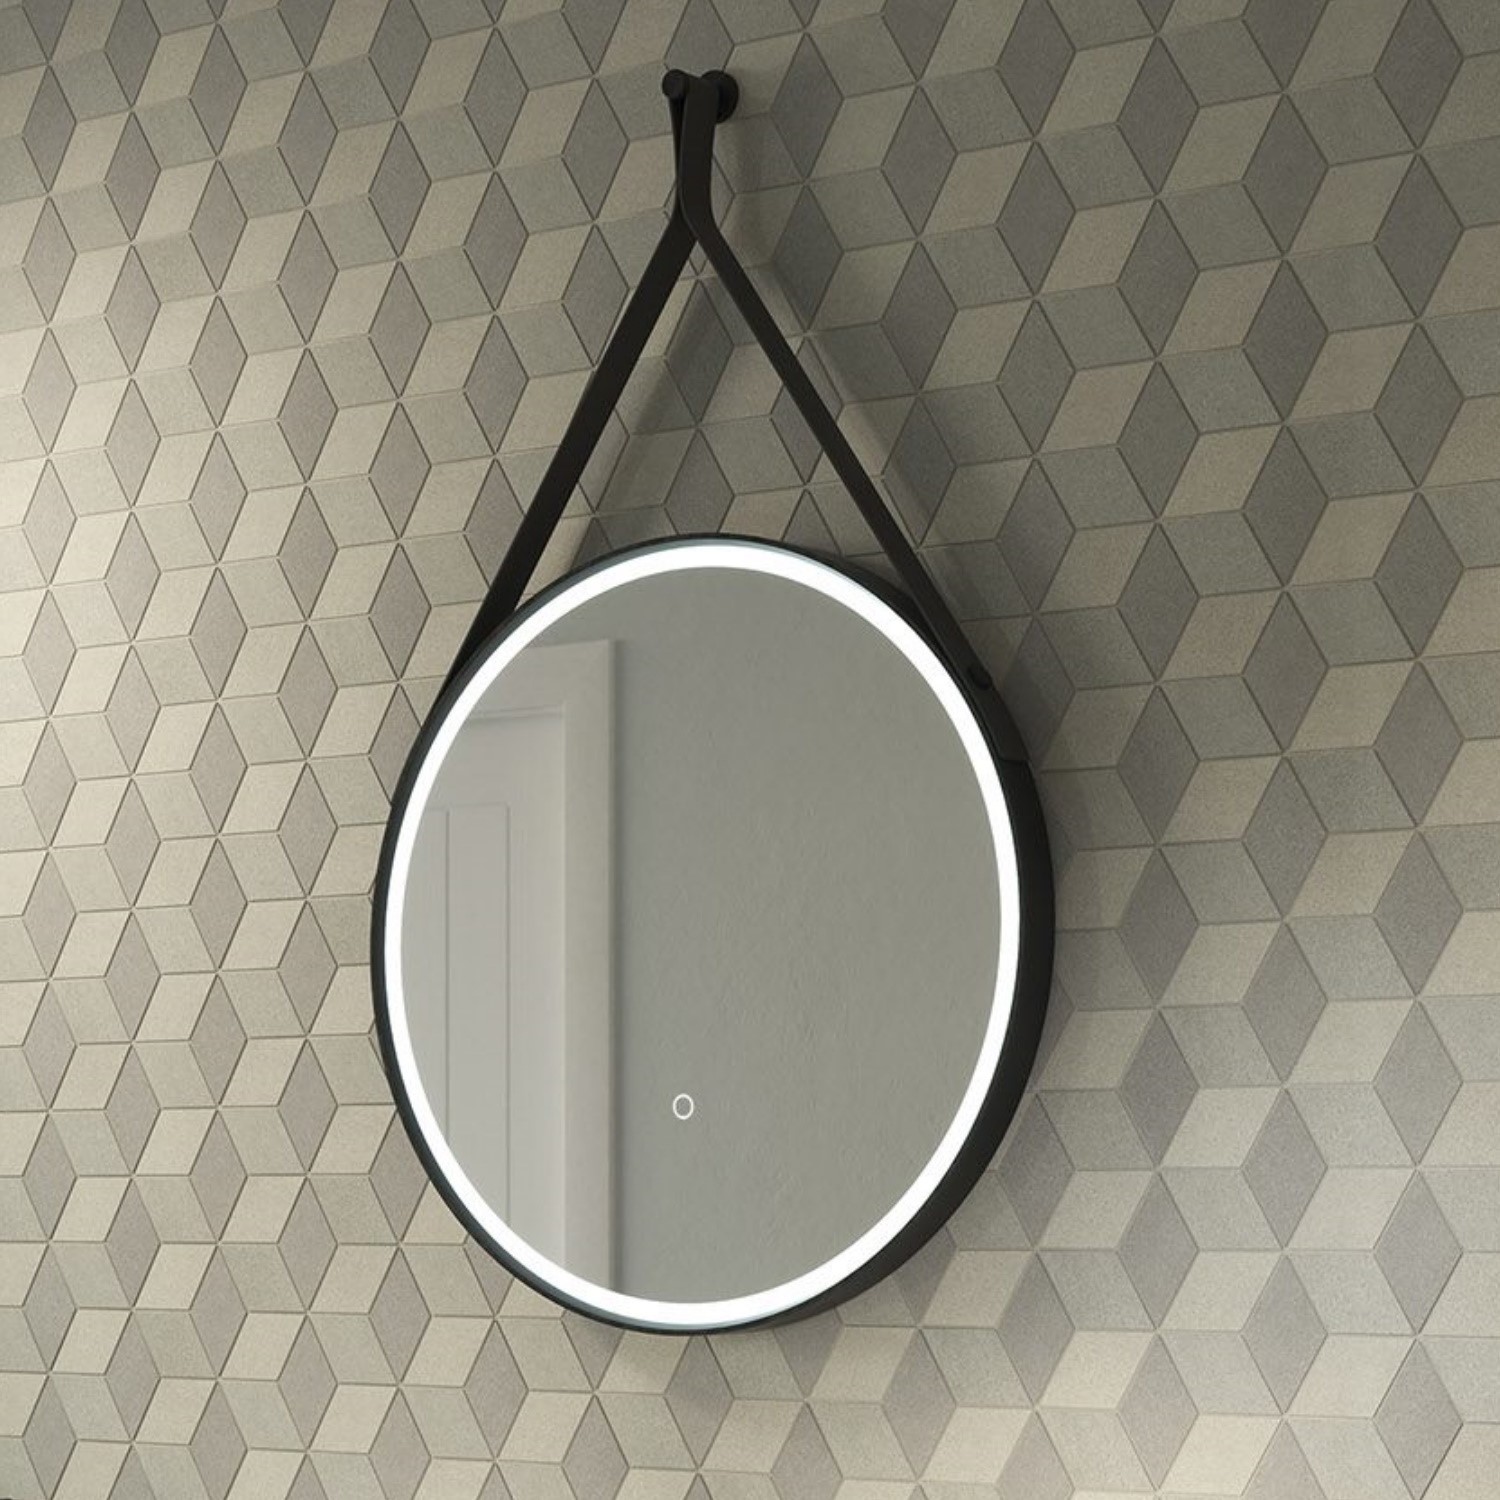 Round Led Bathroom Mirror With Leather, Round Mirror With Black Leather Strap